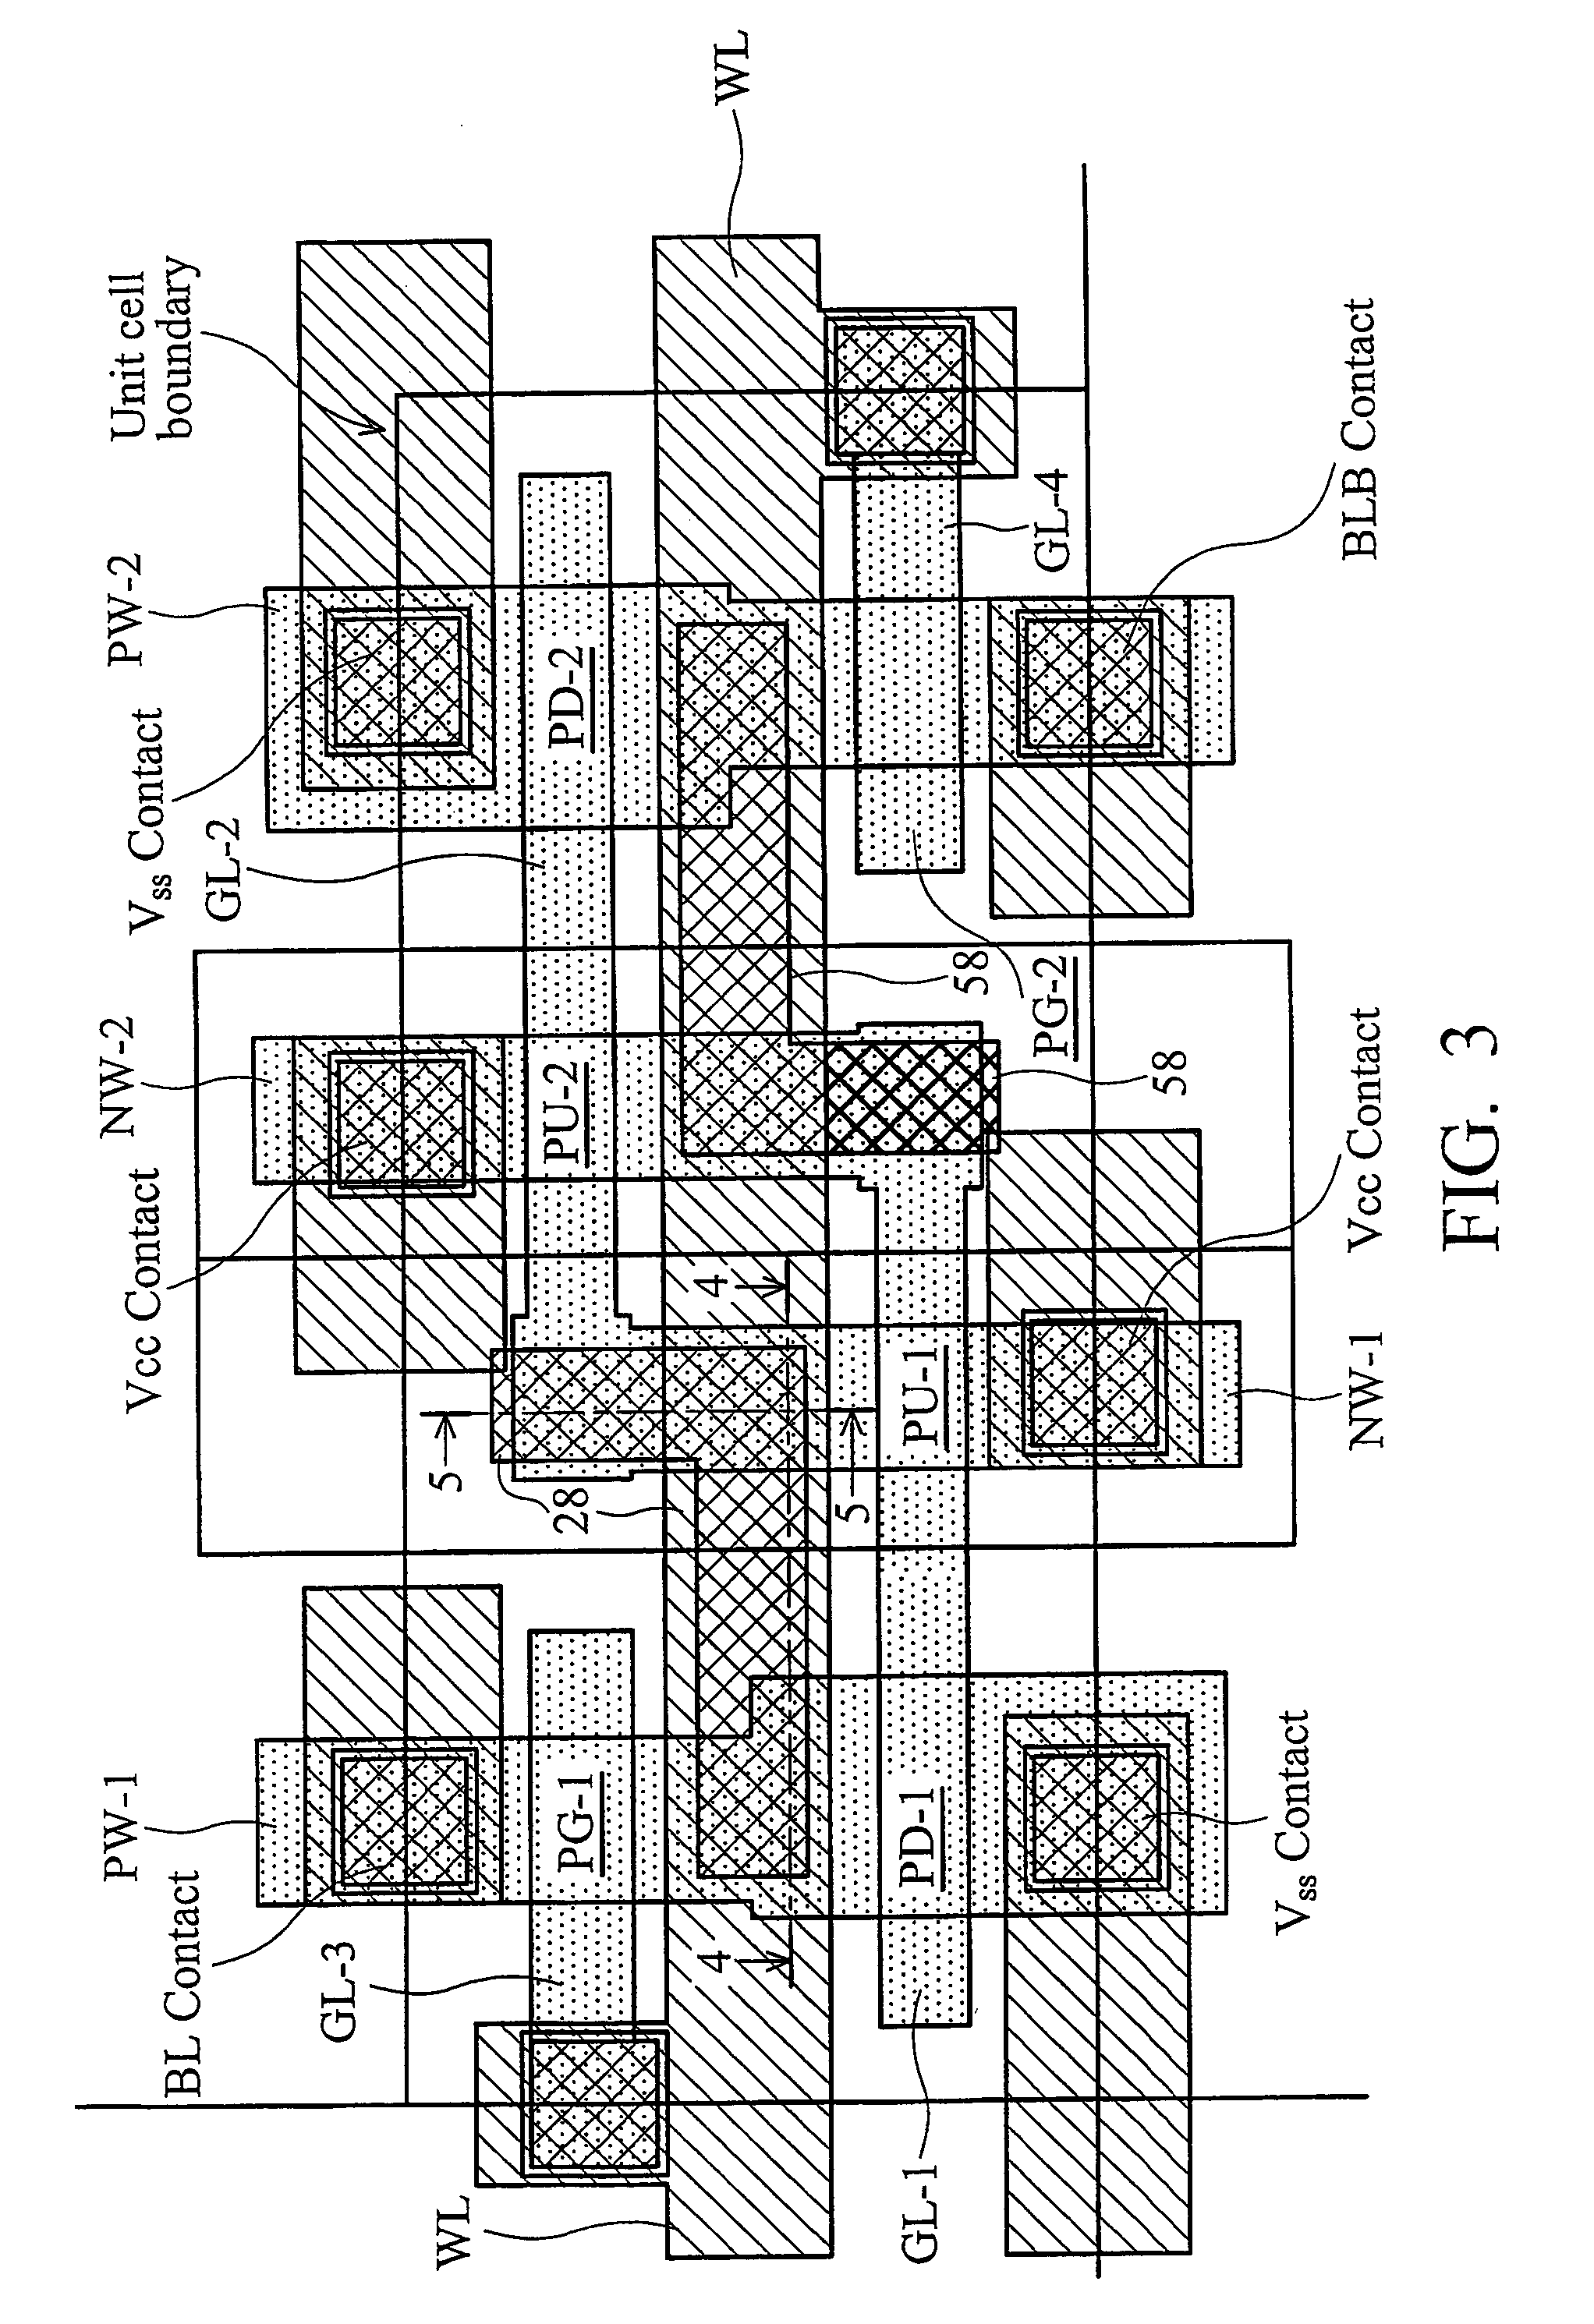 Memory formation with reduced metallization layers